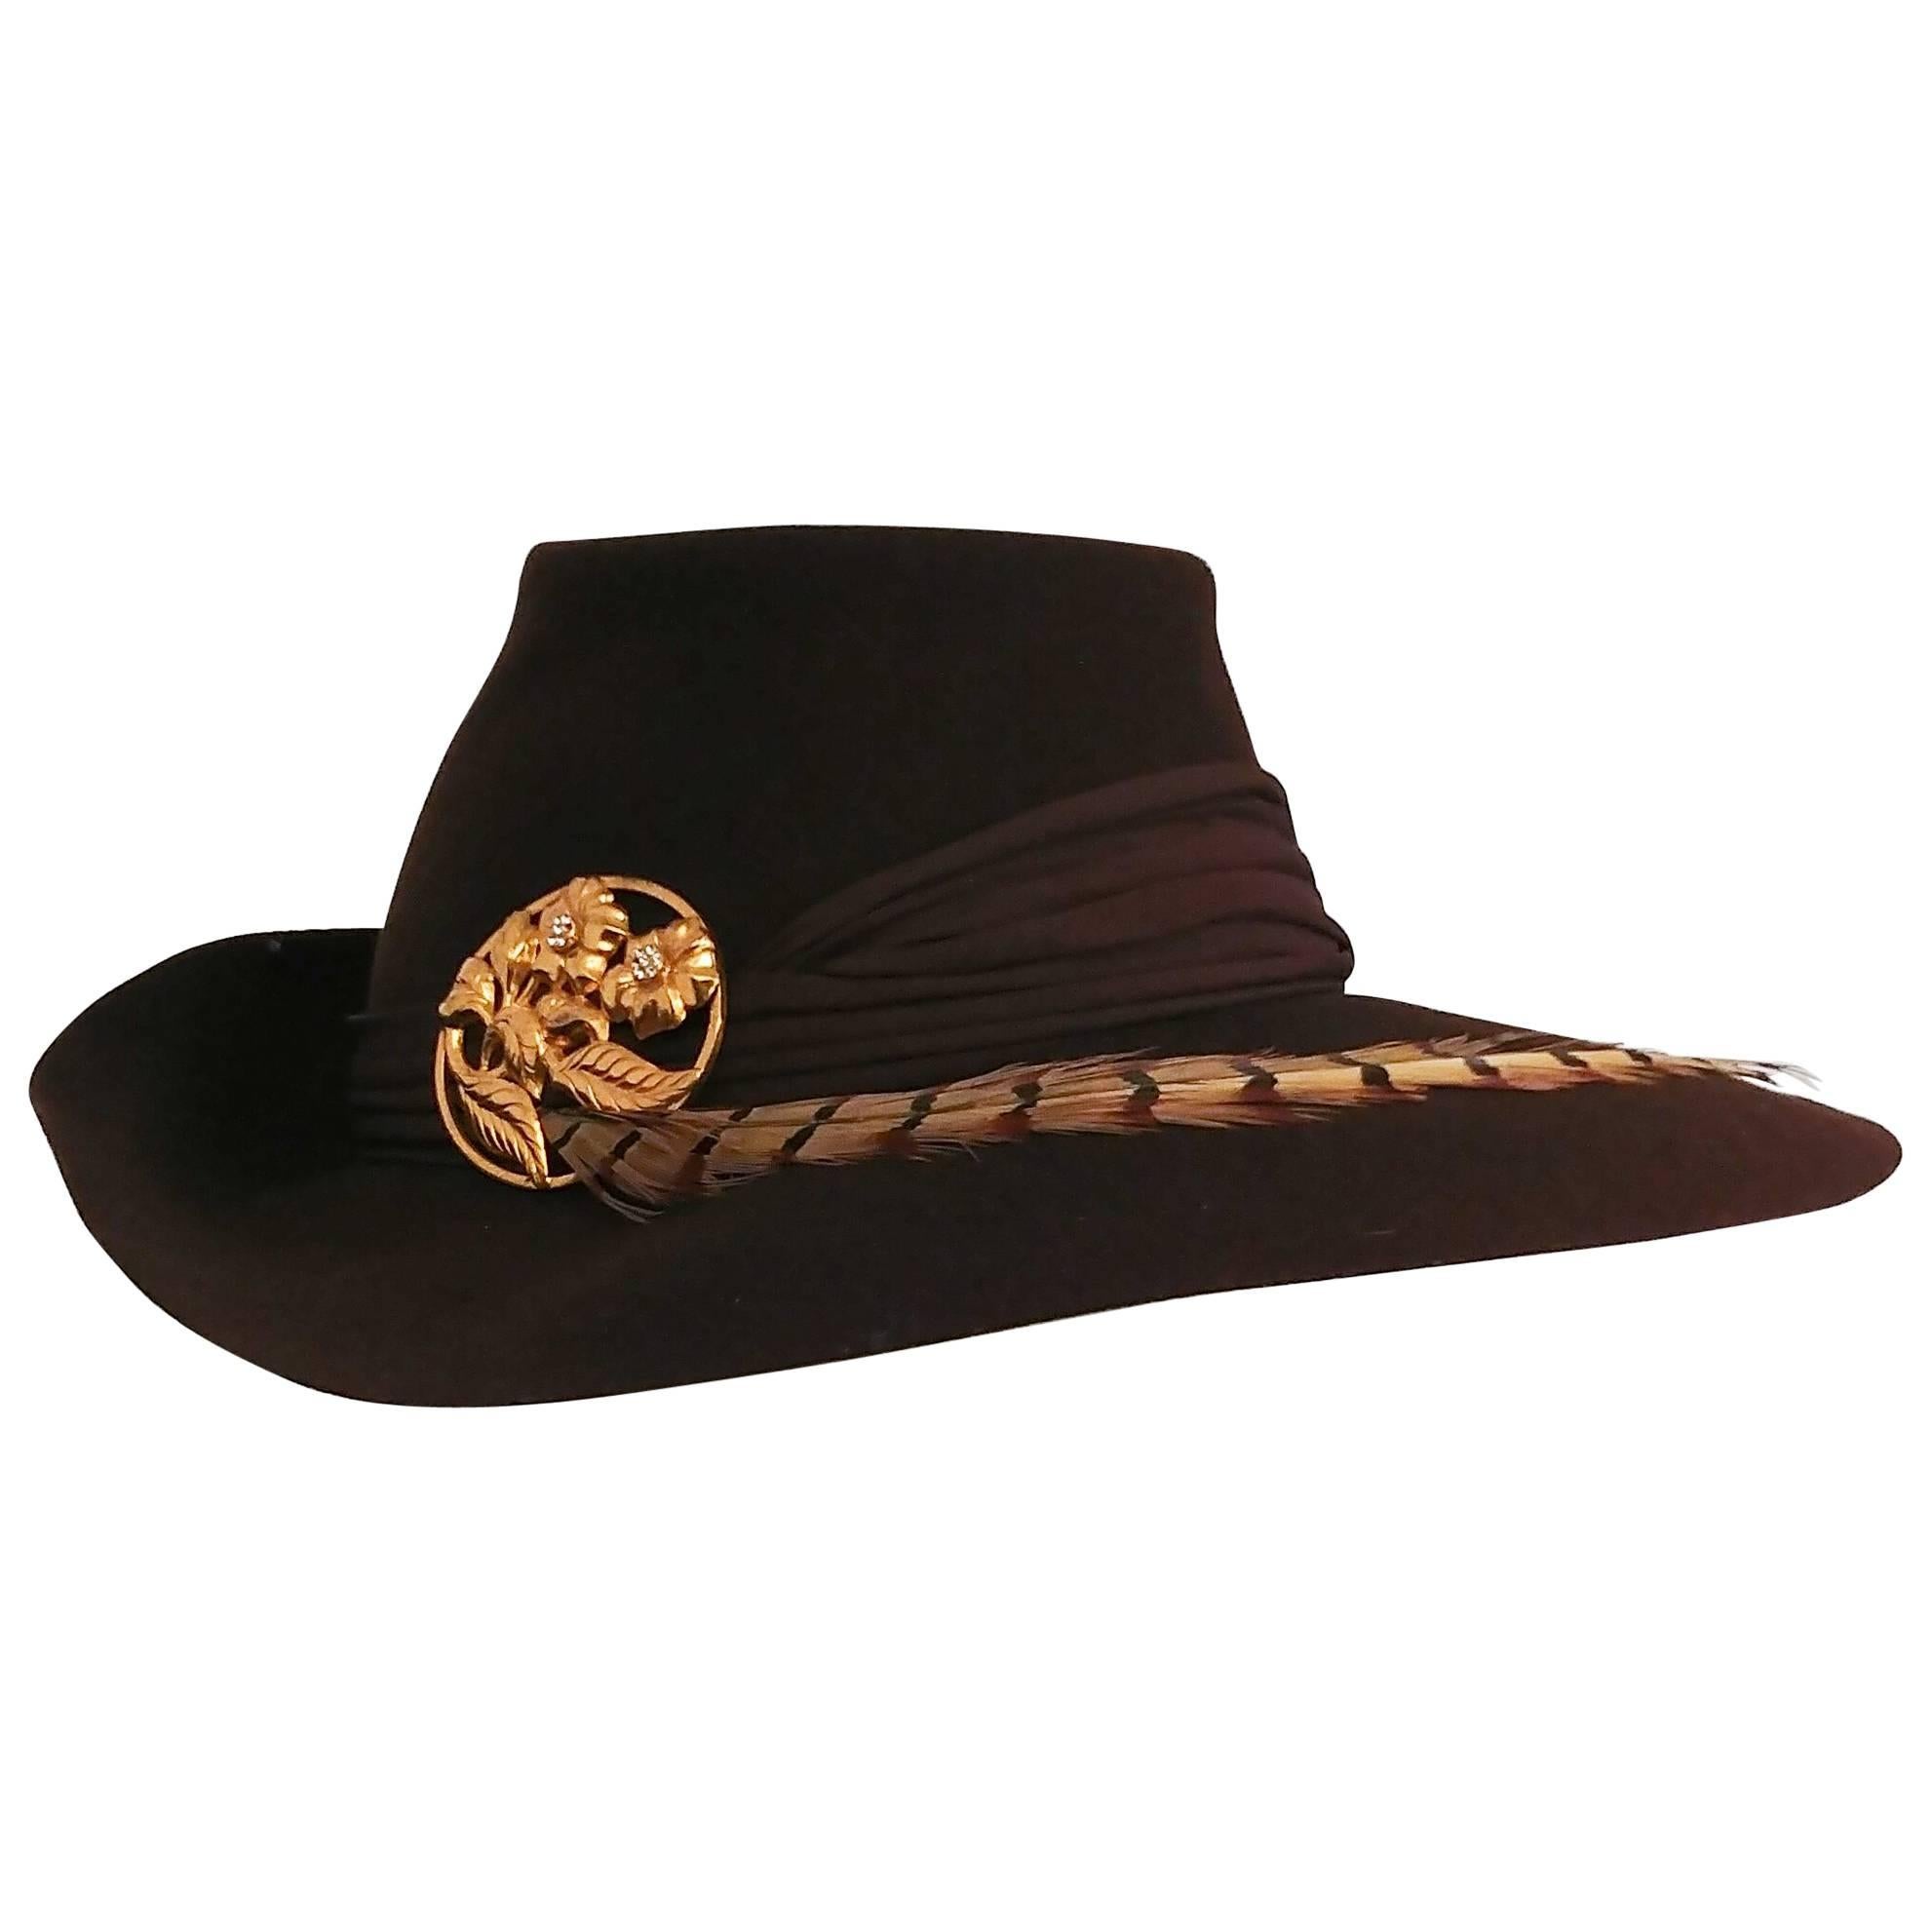 1940s Brown Large Brimmed Hat w/ Pheasant Feather